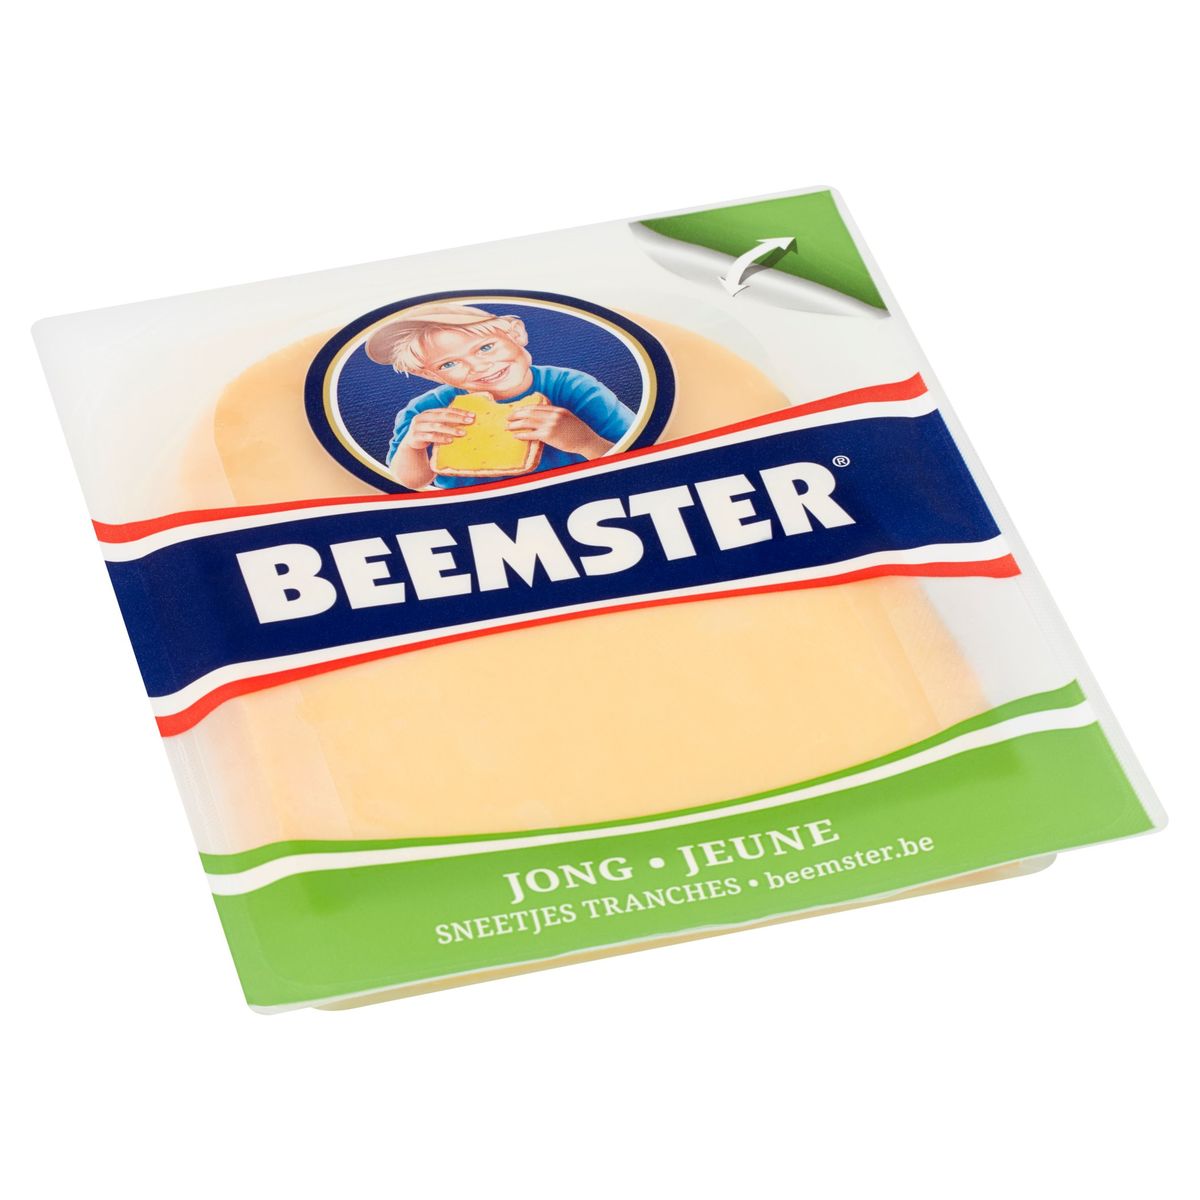 Beemster Jeune Tranches Fromage 48+ 250 g